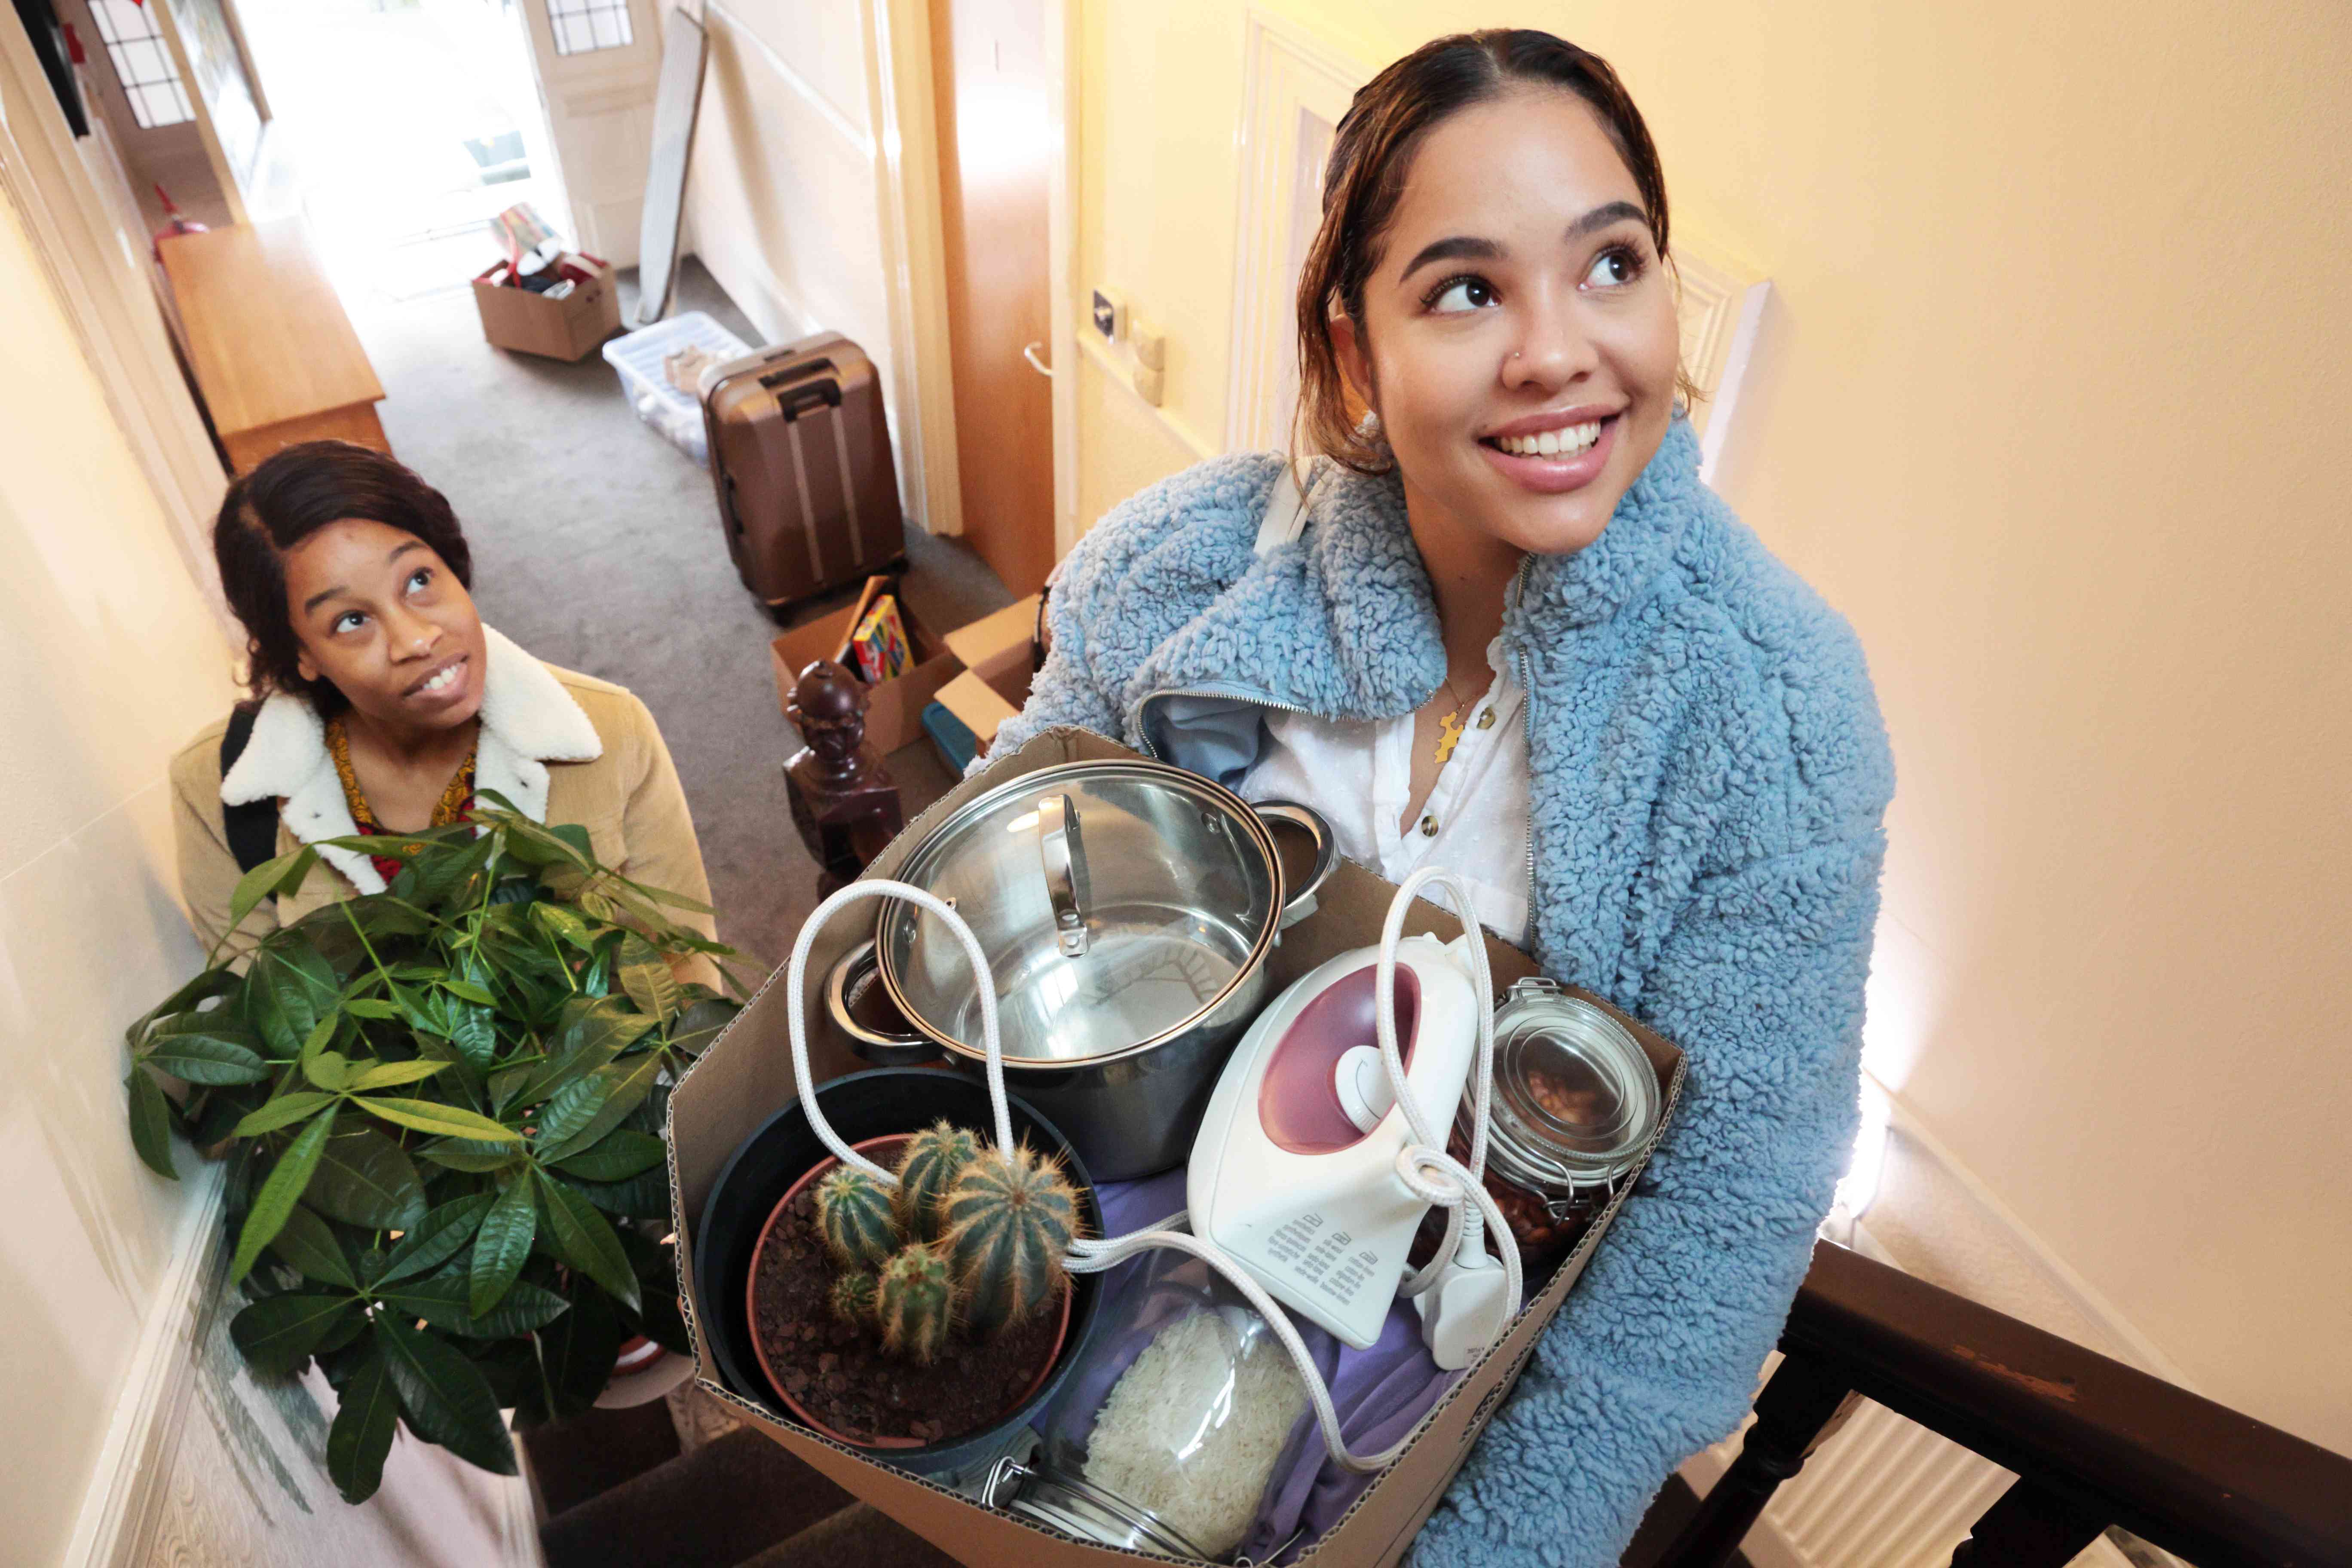 Two young women carry plants and a box of belongings up some interior stairs